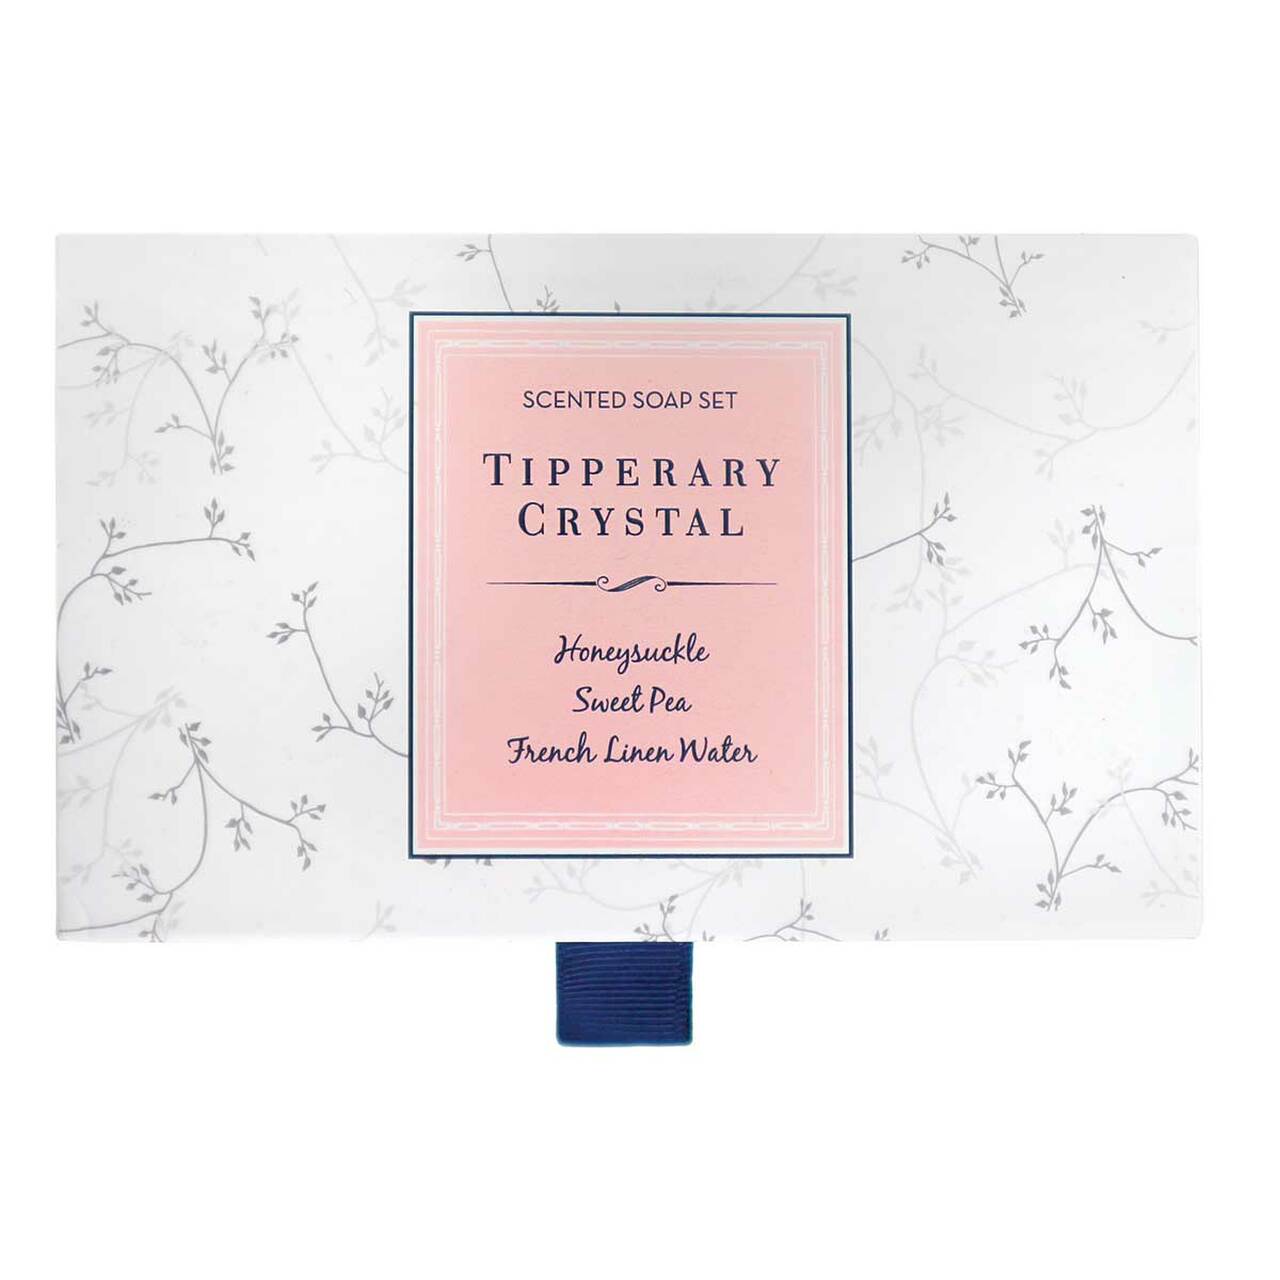 Tipperary Crystal Set Three Scented Soaps Honeysuckle, sweet pea & french linen